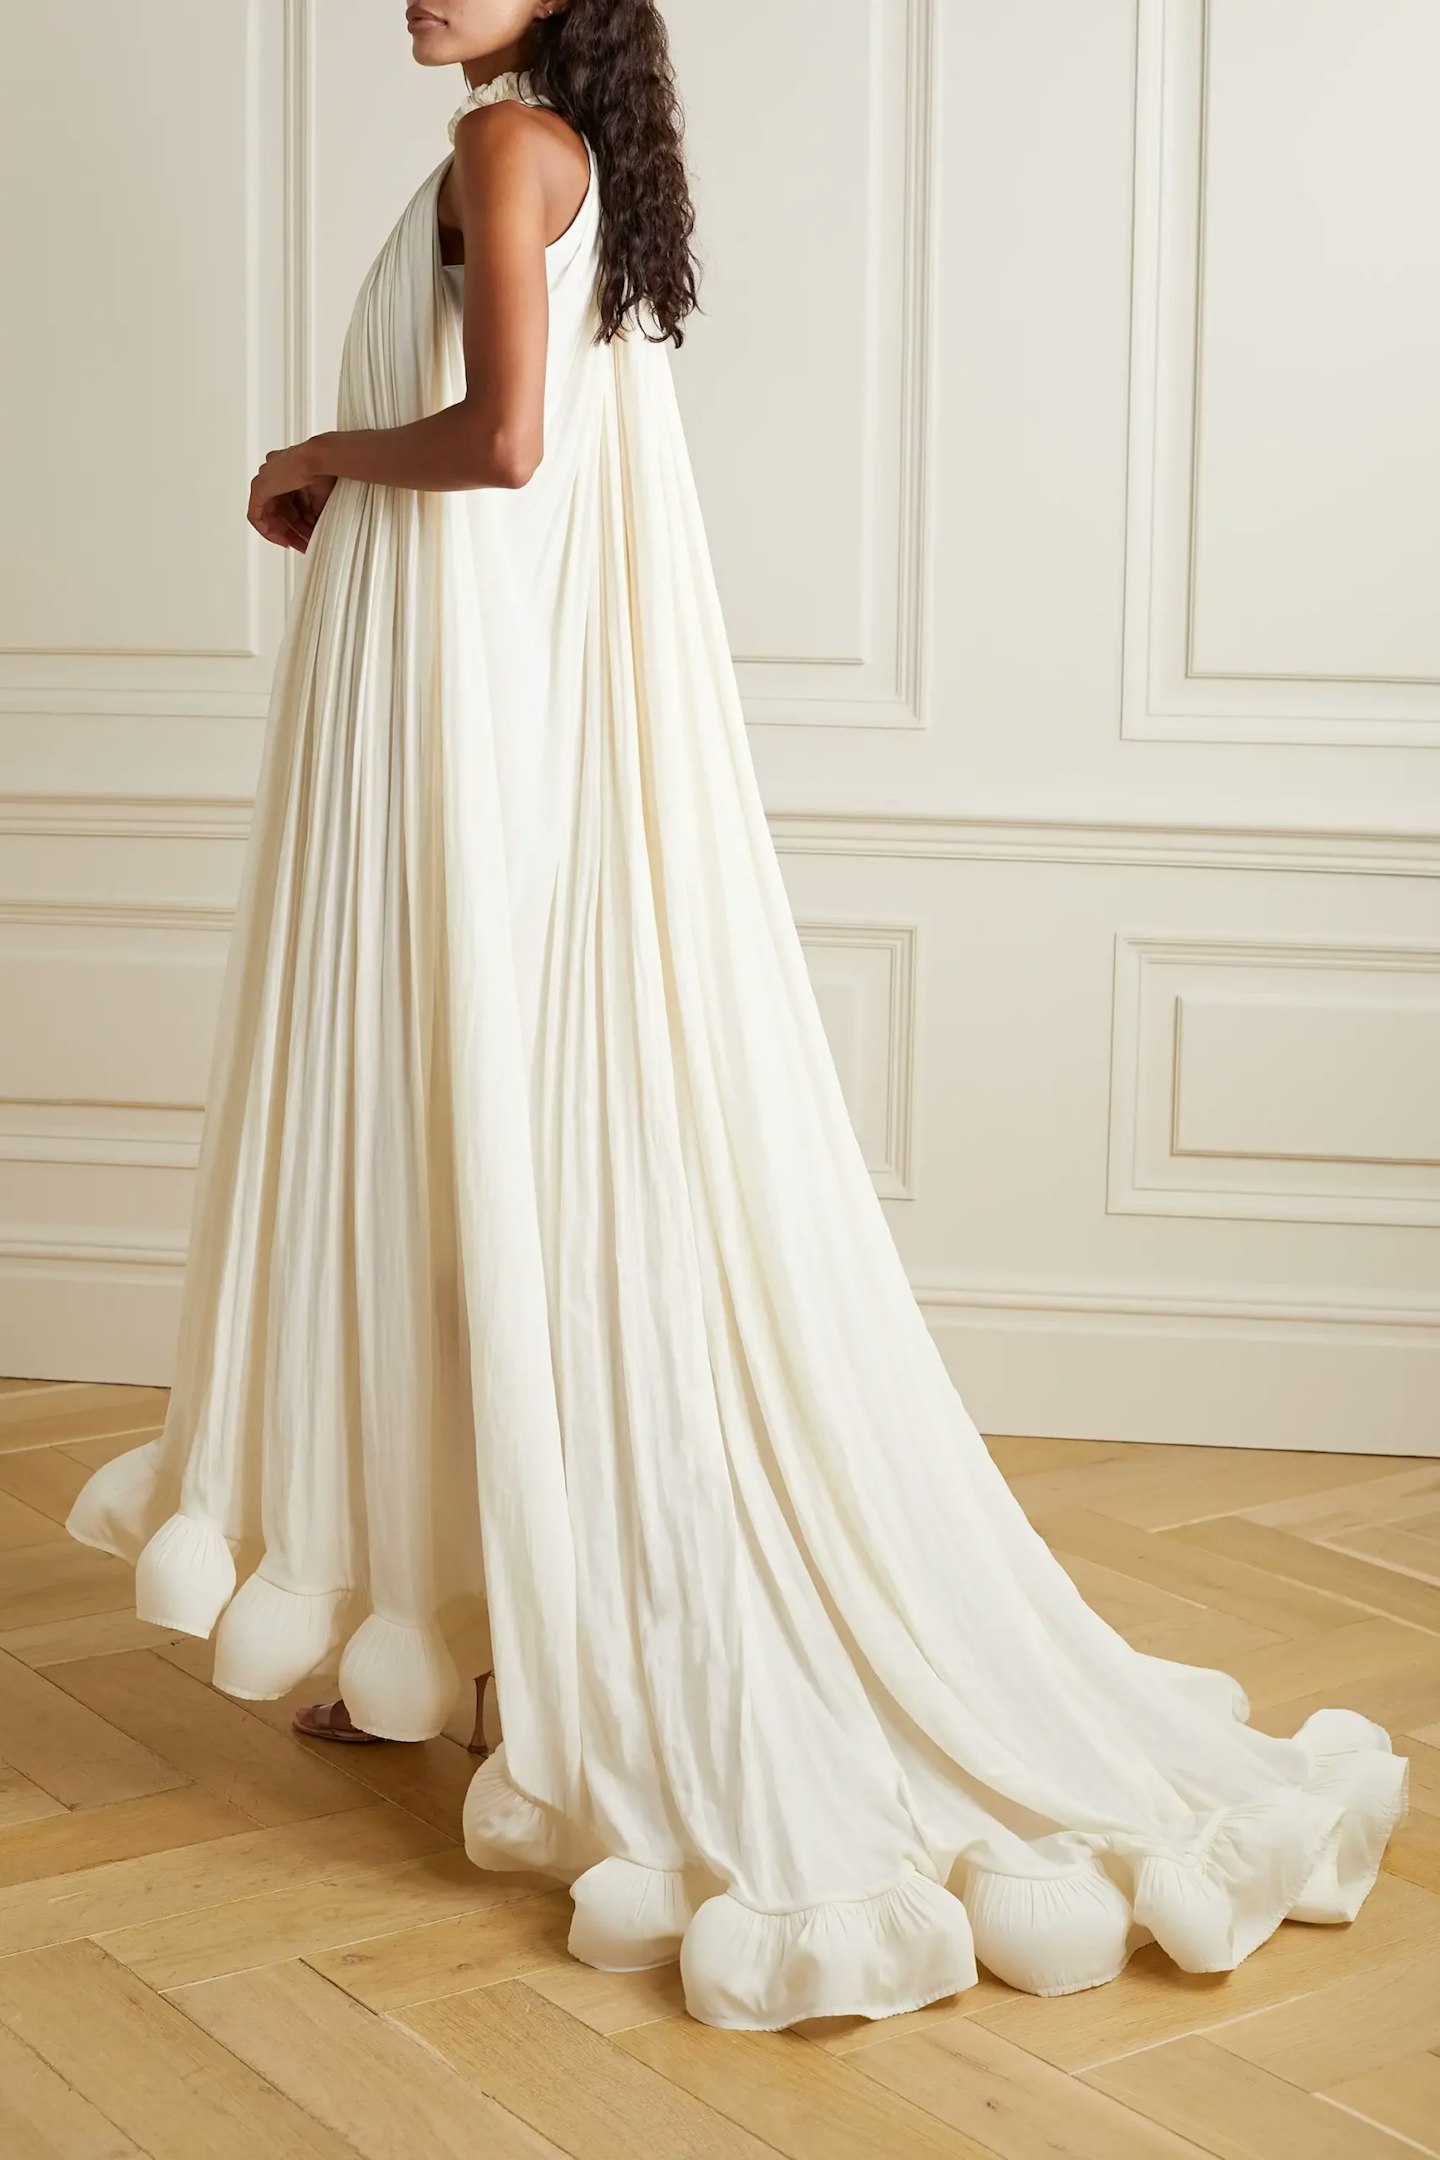 Lanvin Ruffled Charmeuse Gown